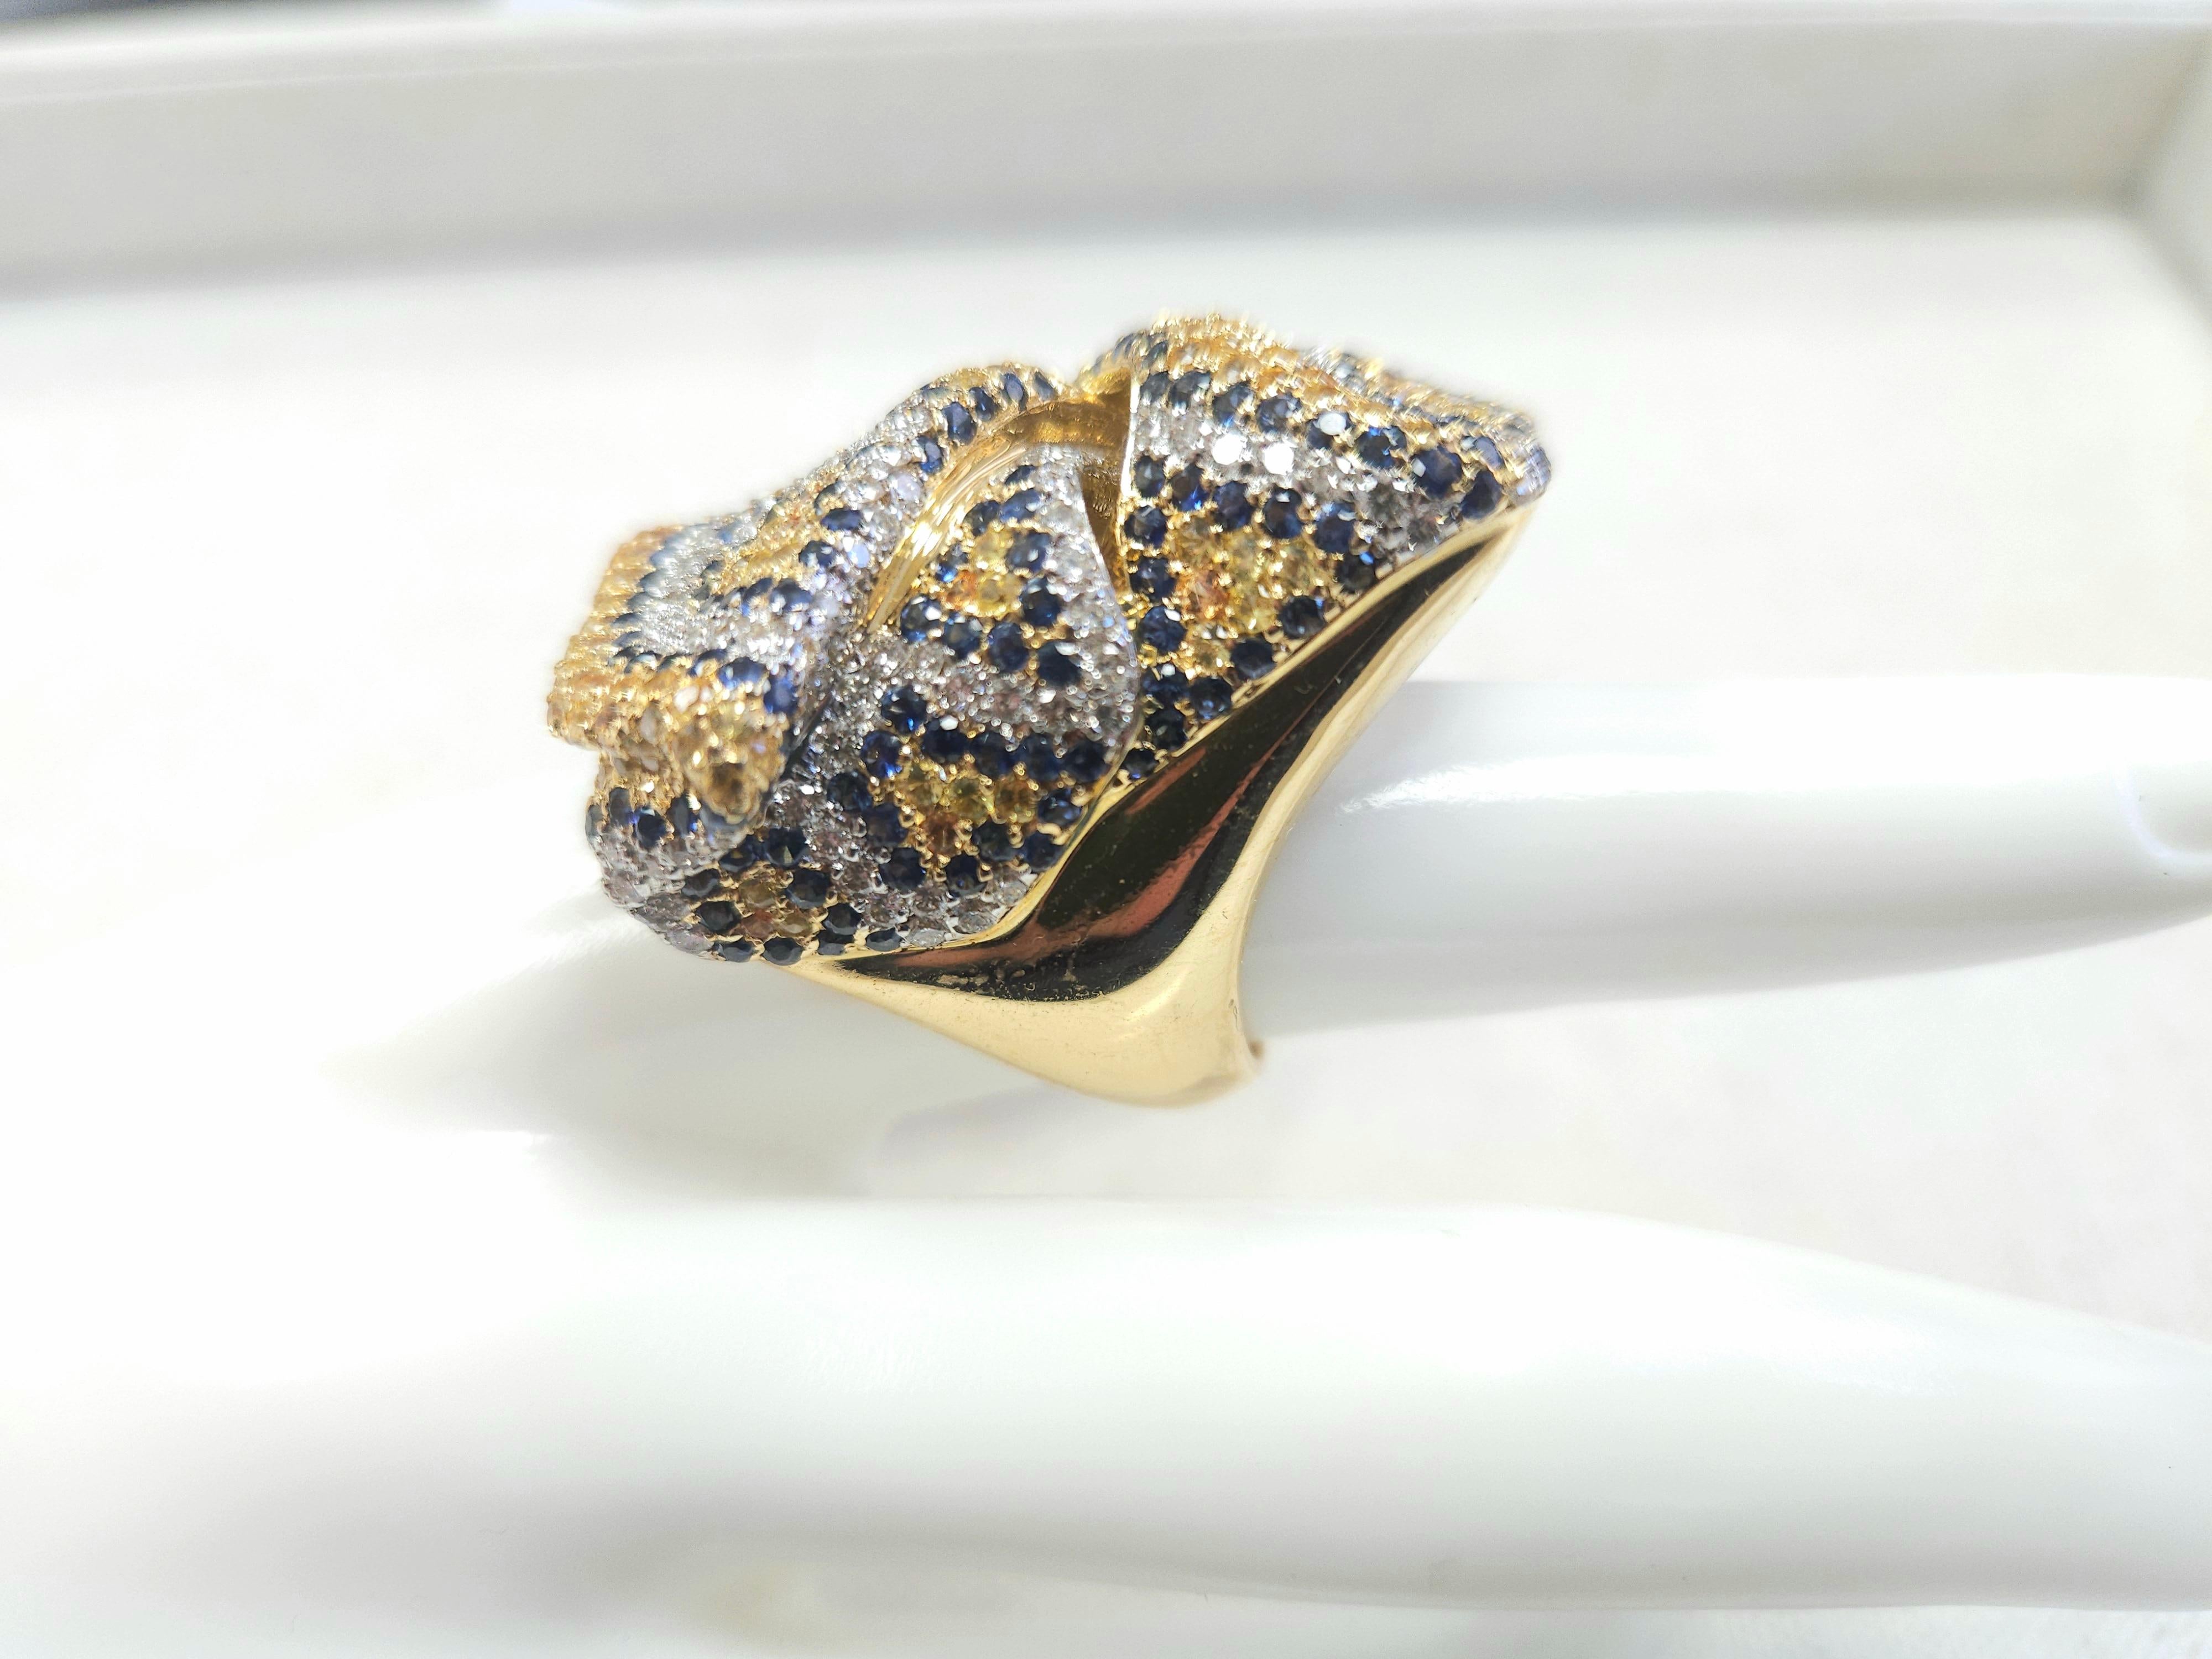 Desginer Hand made Series mulitpe color with Blue and Yellow 18K Yellow Gold ring, size 8, Average H-VS, 42.10 grams.

*Free Shipping within U.S*